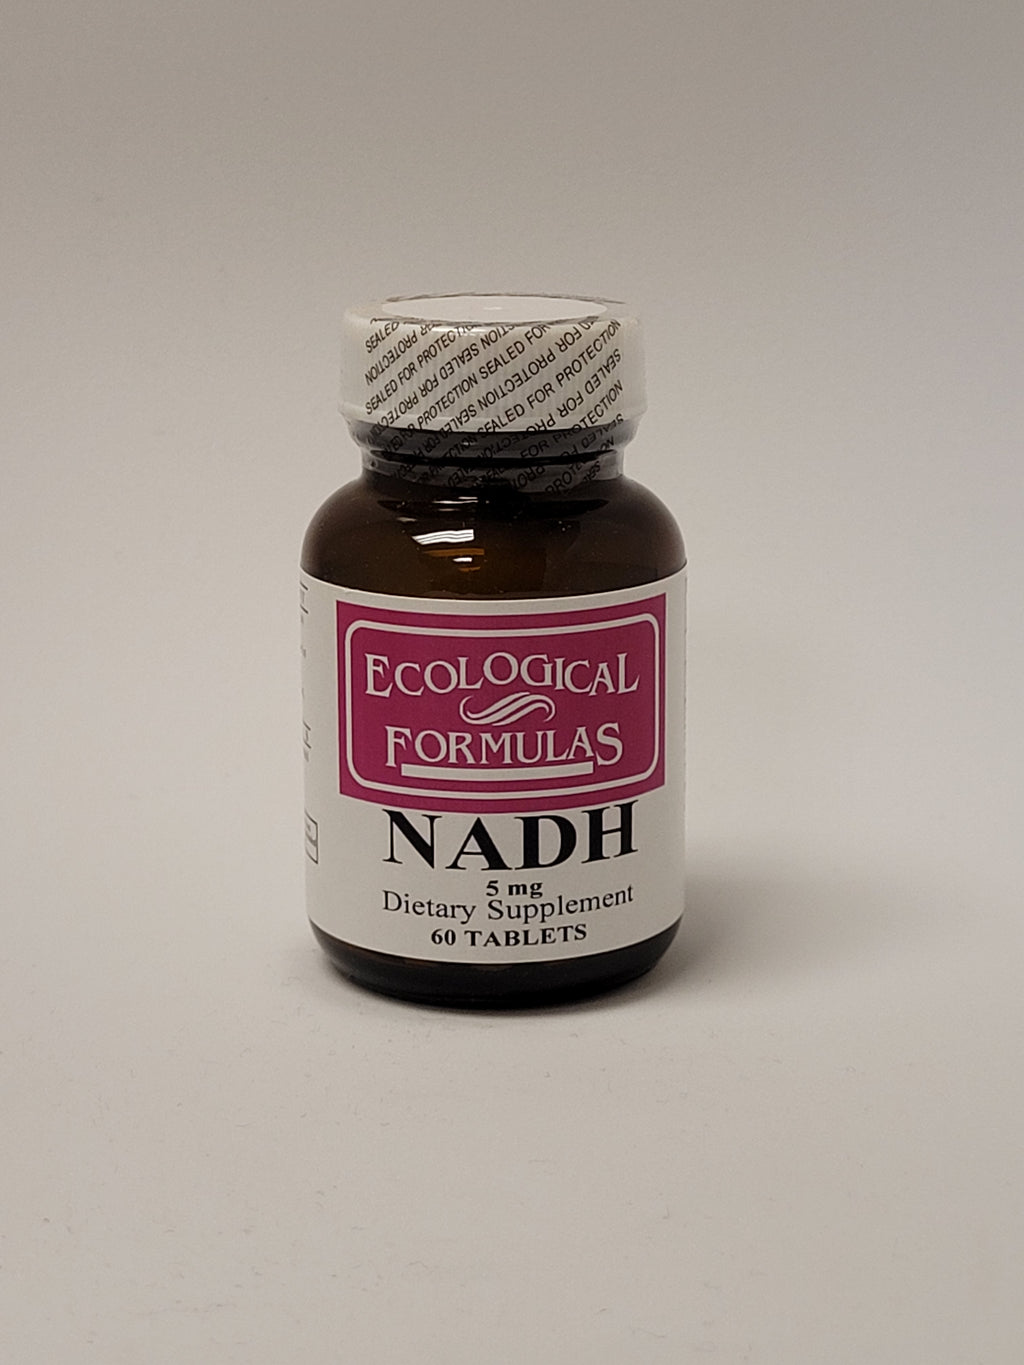 NADH by Ecological Formulas